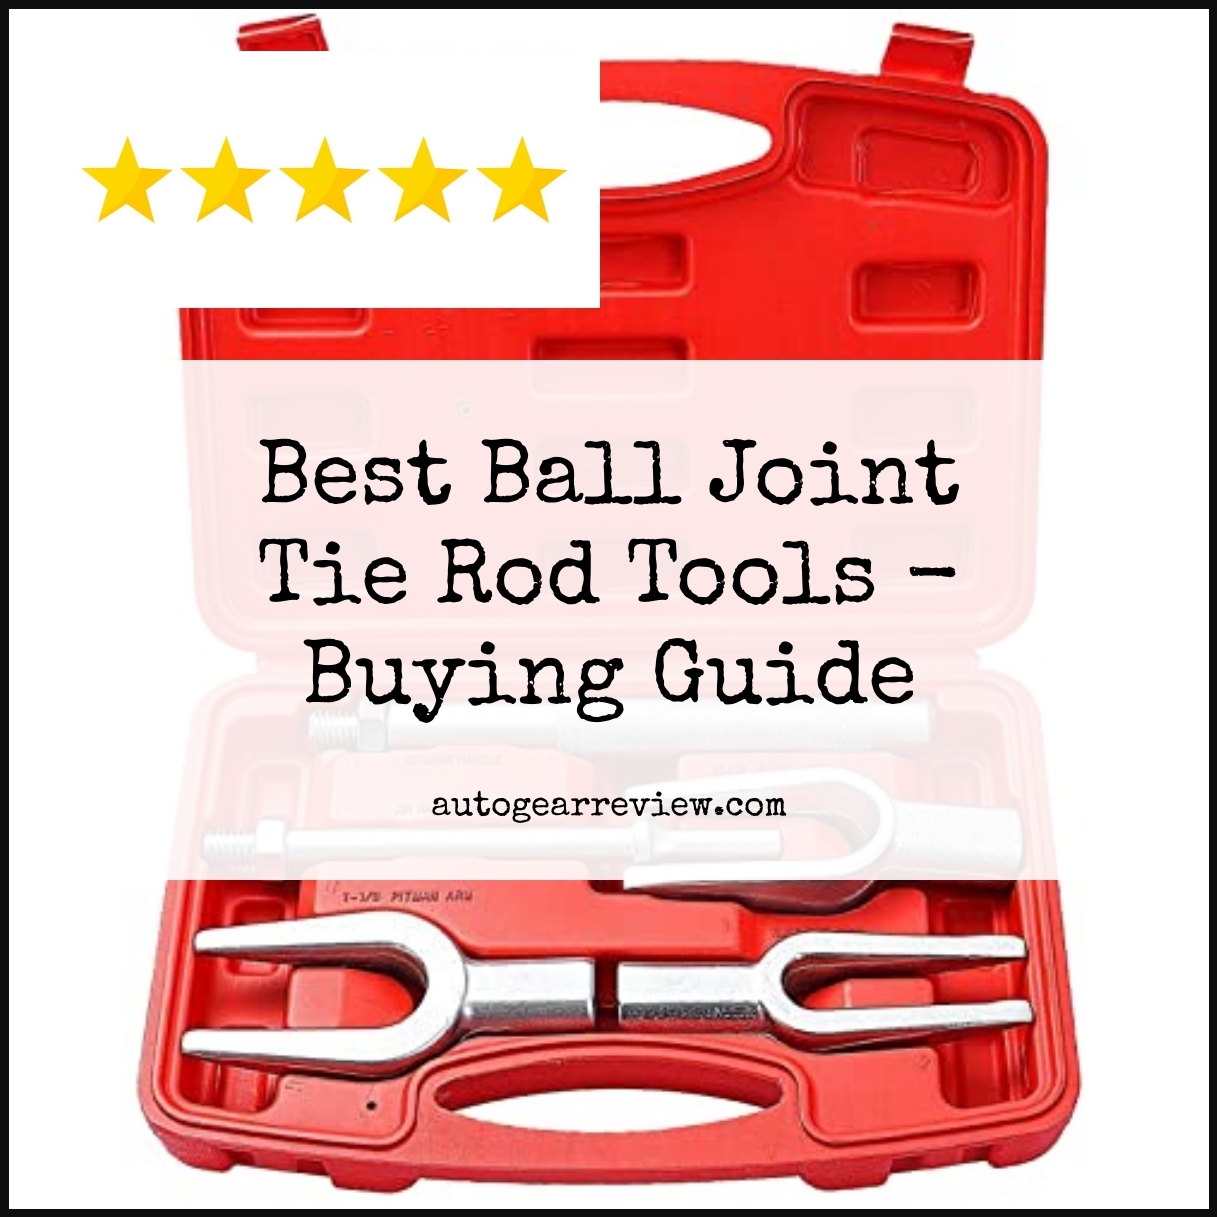 Best Ball Joint Tie Rod Tools - Buying Guide